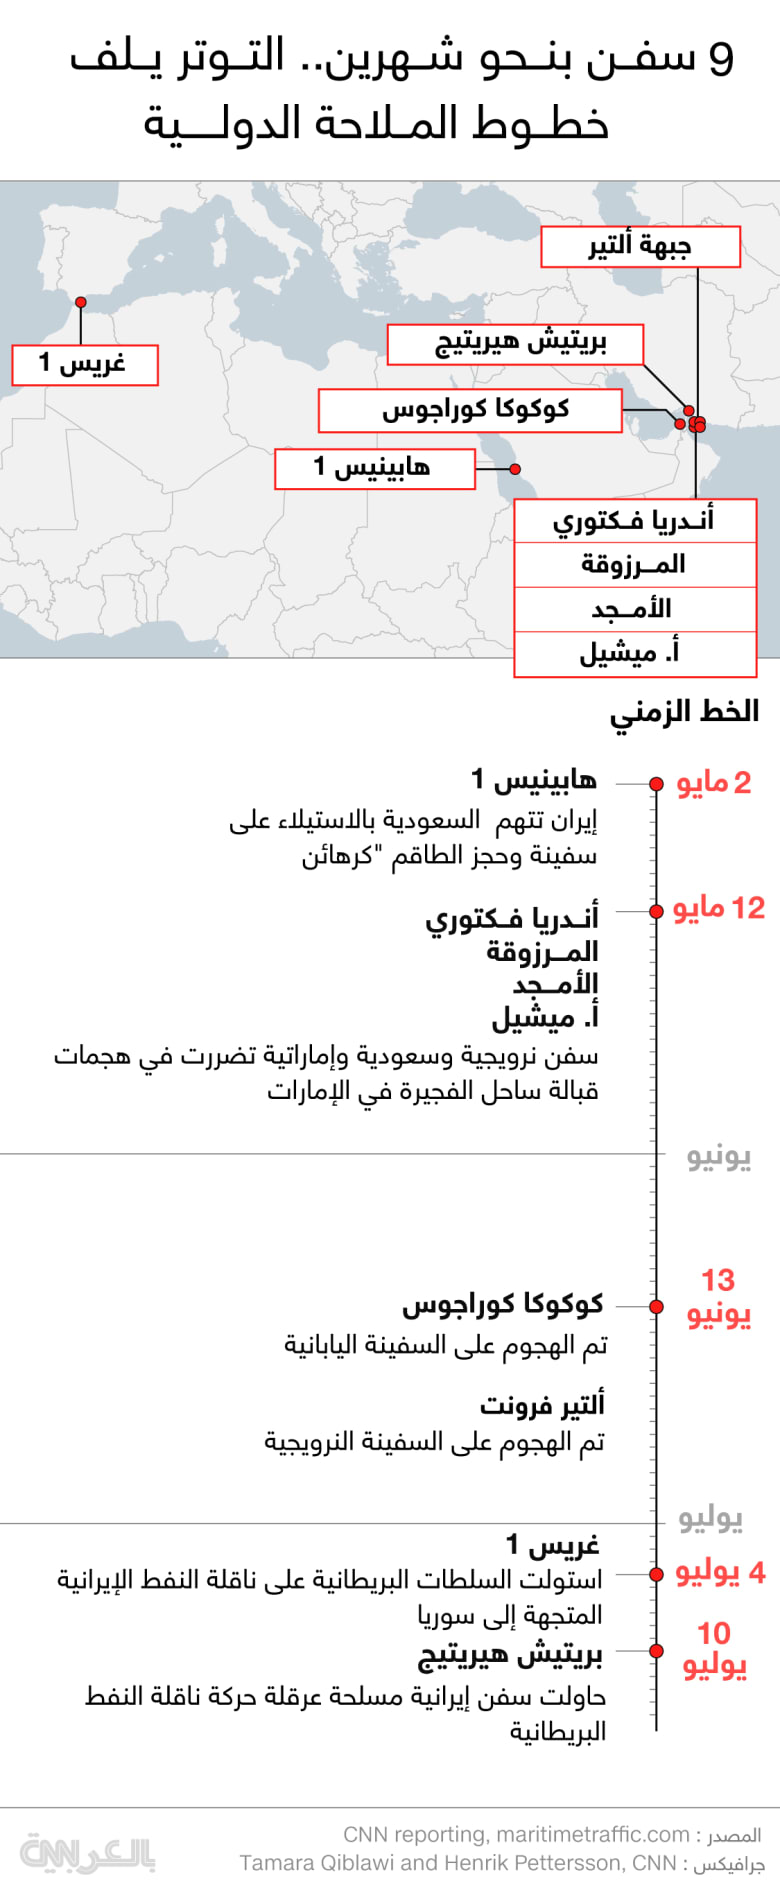 Timeline-Iran-tankers-incidents